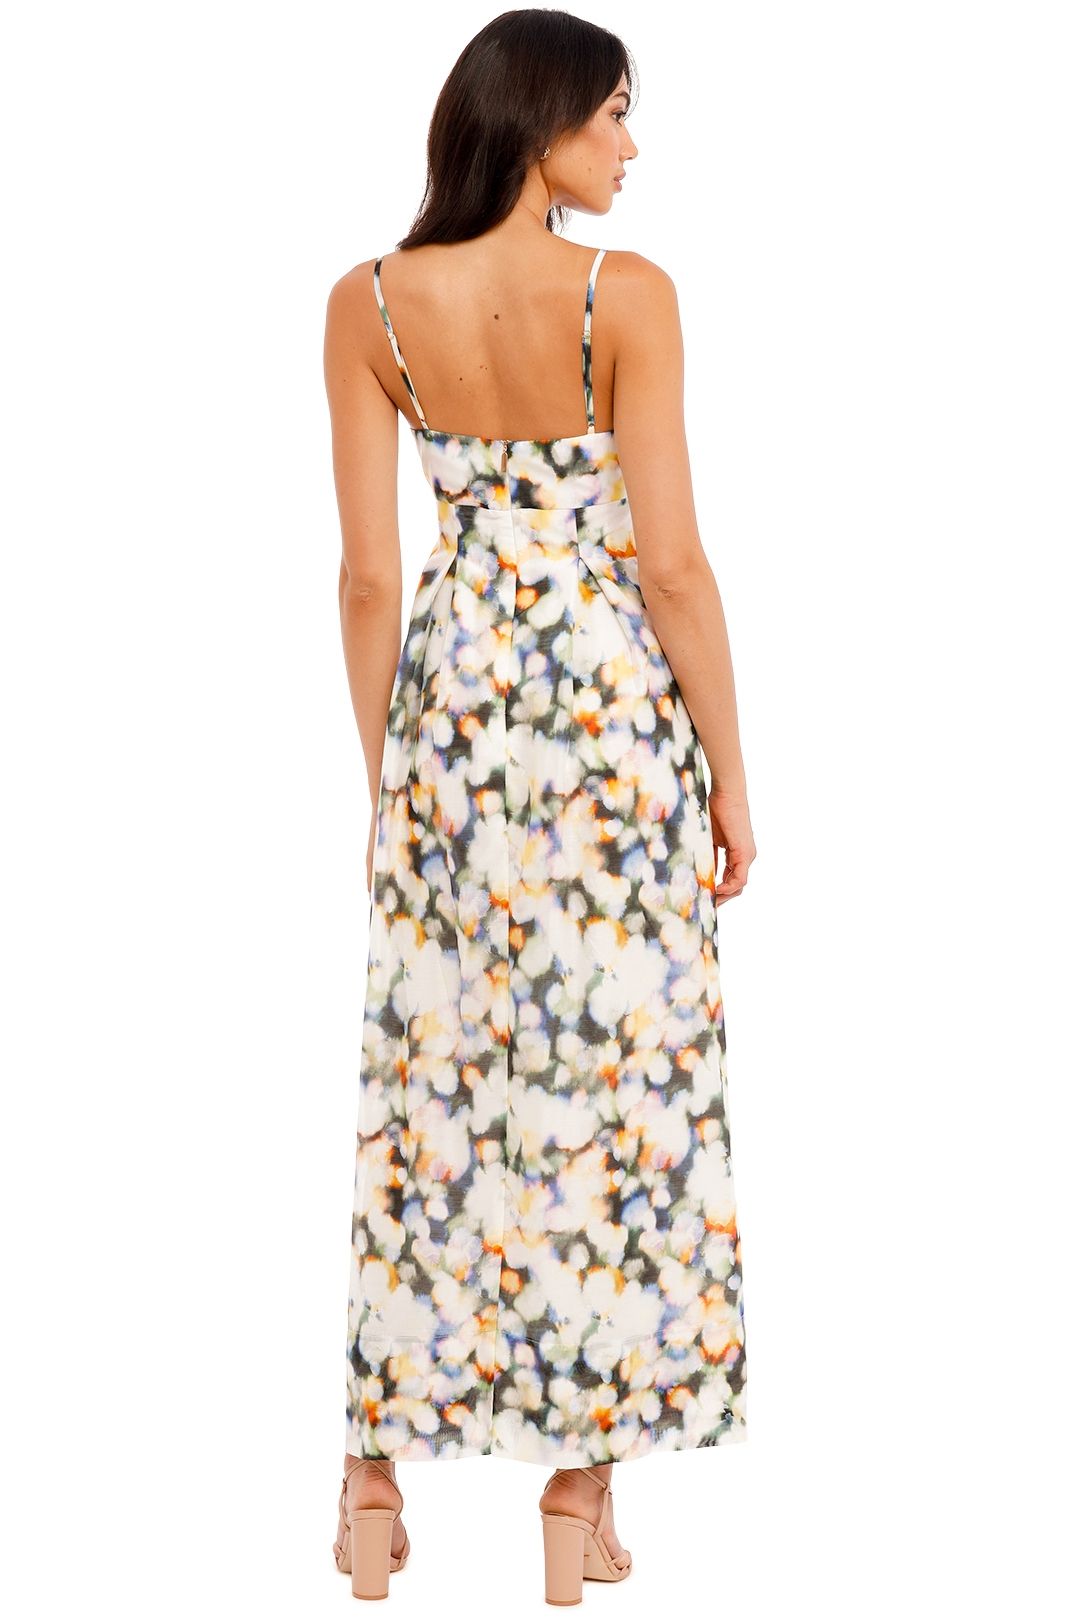 Lumiere Sundress in Lumiere Ginger and Smart print